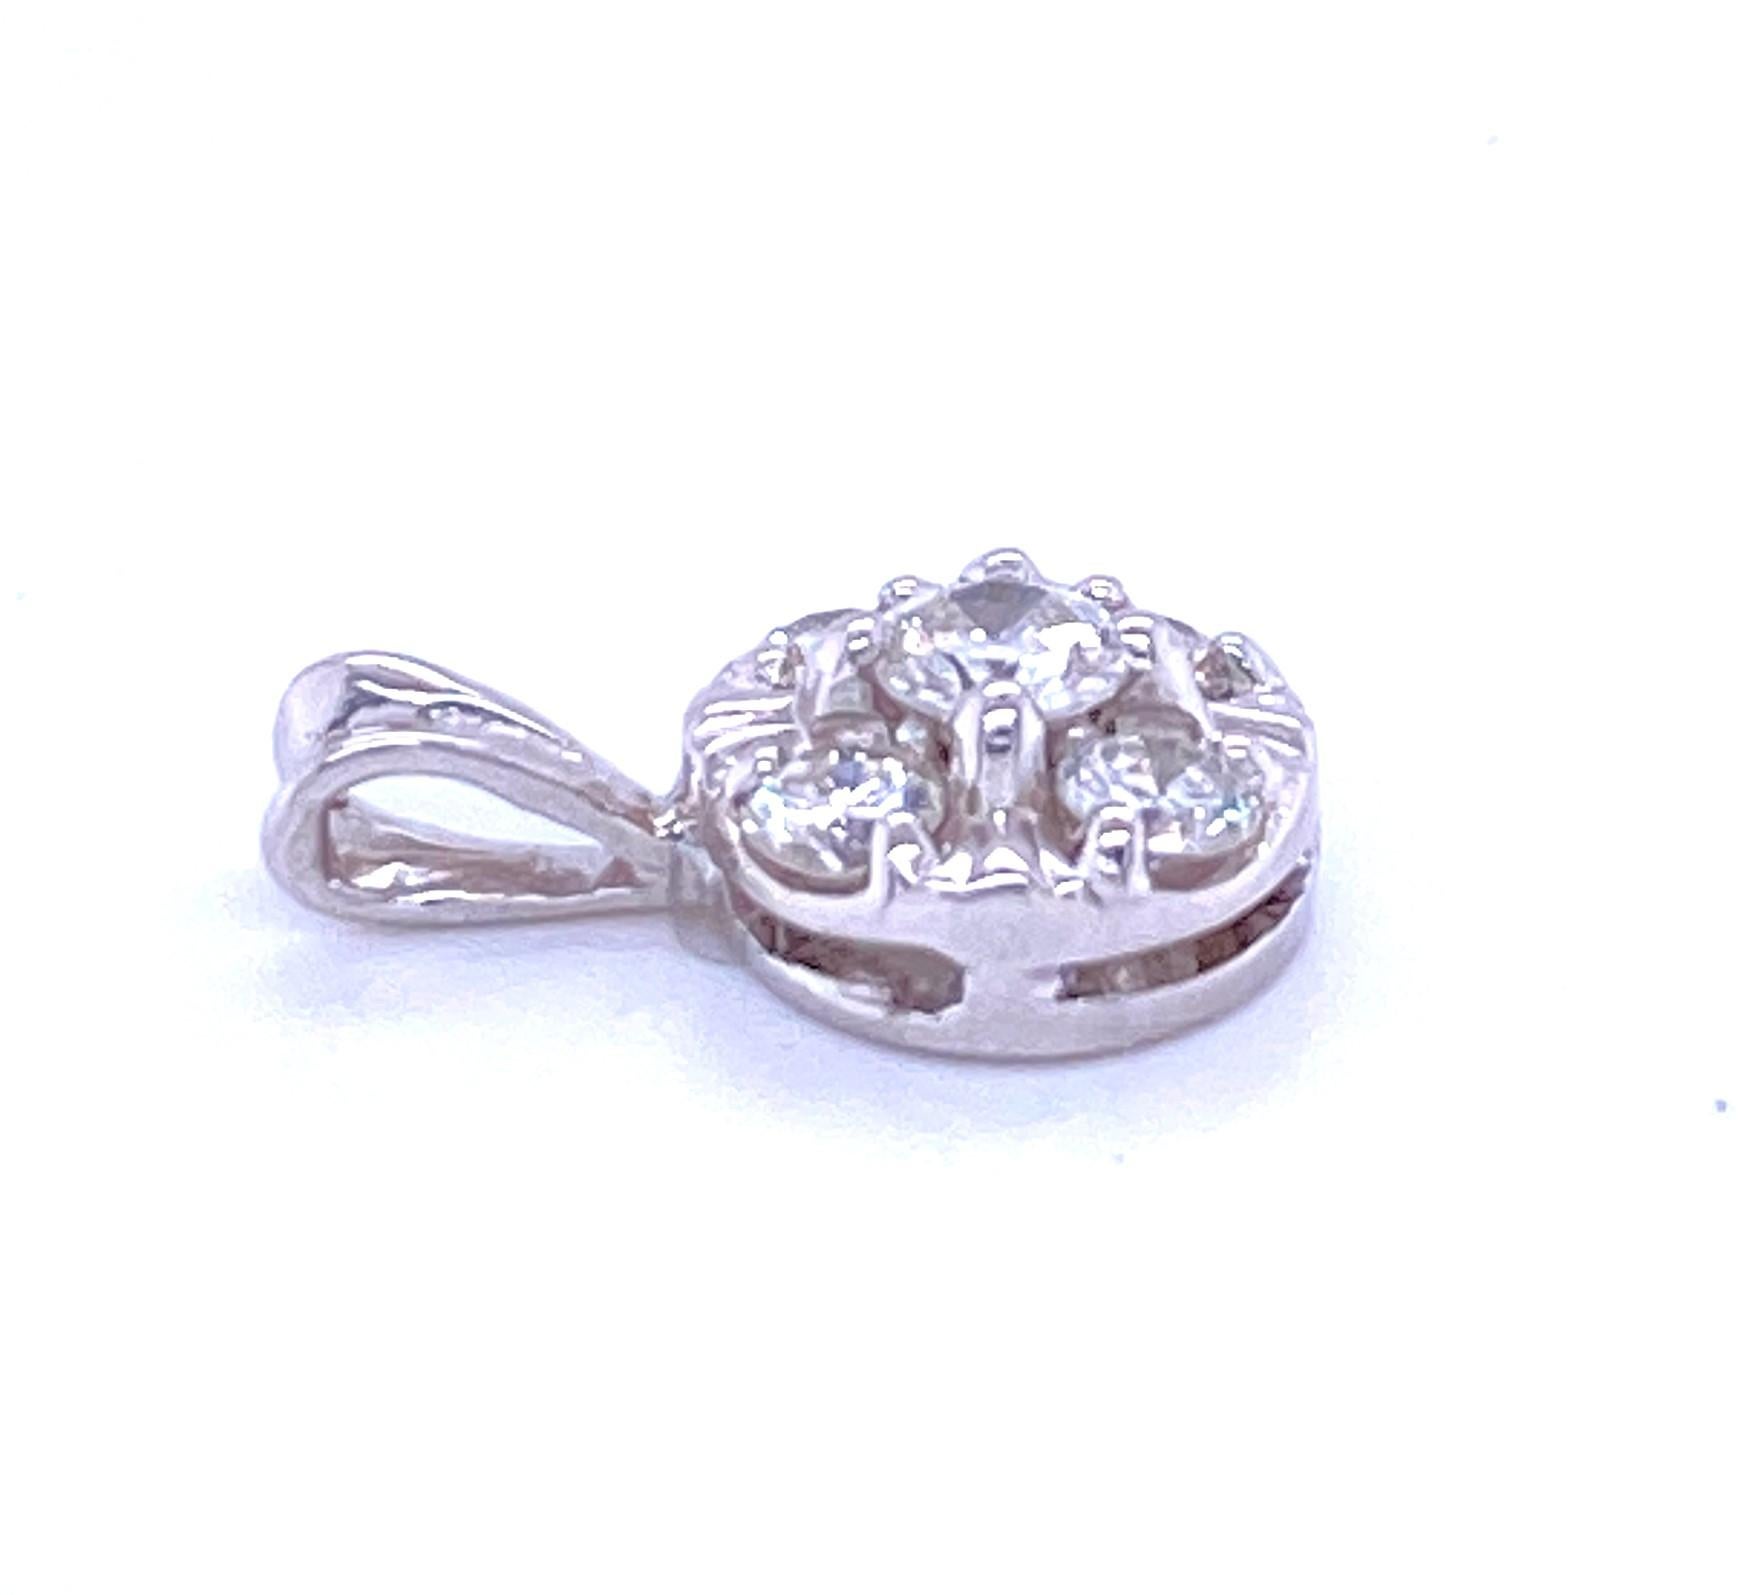 One 14 karat white gold (stamped 14K) cluster style pendant measuring 9mm in diameter prong set with one 3.5mm center round diamond surrounded by four 2.5mm round diamonds, approximately 0.35 carat total weight with matching H/I color and SI1/SI2